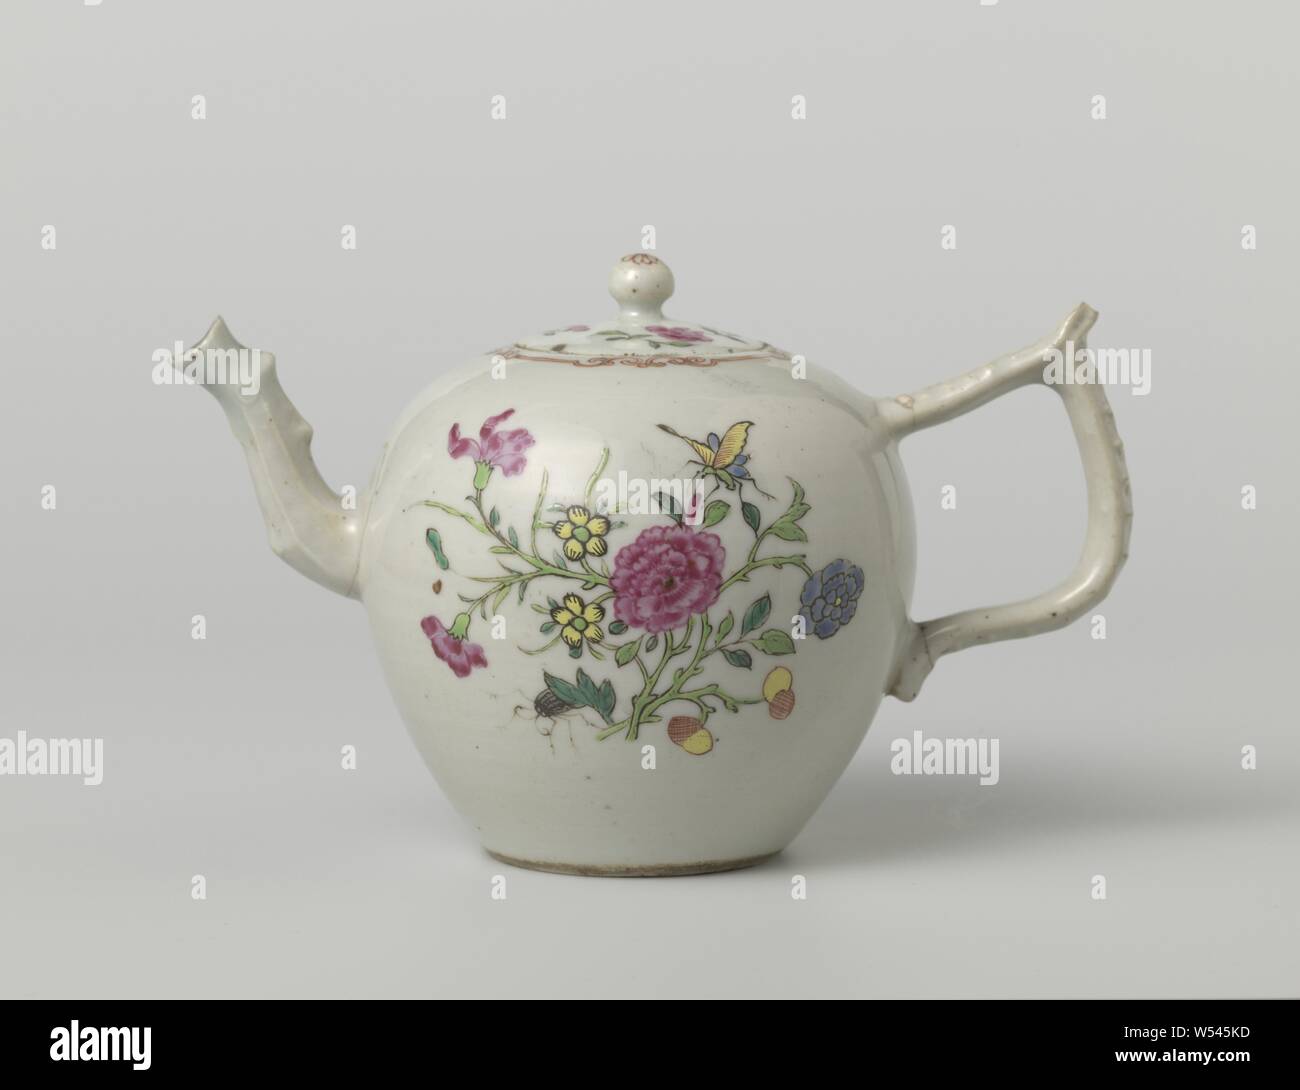 Ovoid teapot with flowering plants, butterly and beetle, egg-shaped teapot of porcelain, painted on the glaze in blue, red, pink, green, yellow, black and gold. Flowering plants with a butterfly and beetle between the ear and the spout on both sides, a band of curl on the shoulder. Spout and ear have been broken off. Decorated in famille rose in Europe., anonymous, China, c. 1750 - c. 1774, Qing-dynasty (1644-1912) / Qianlong-period (1736-1795), porcelain (material), glaze, gold (metal), vitrification, h 10.7 cm d 4.7 cm d 11 cm d 6 cm l 19.5 cm Stock Photo